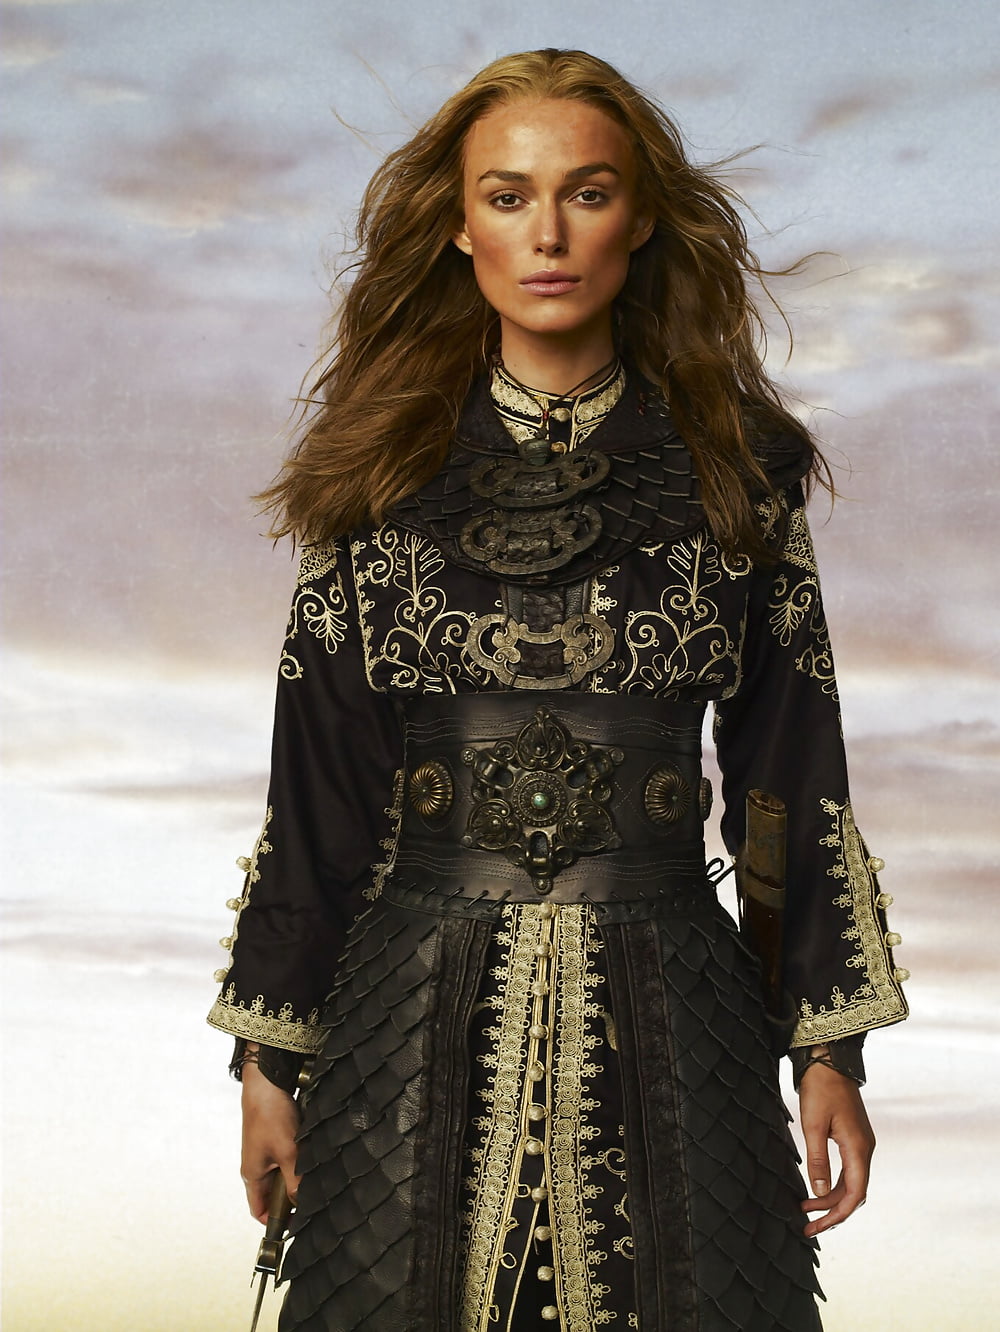 Keira Knightley POTC At Worlds End promoshoot (2007) (4/26)